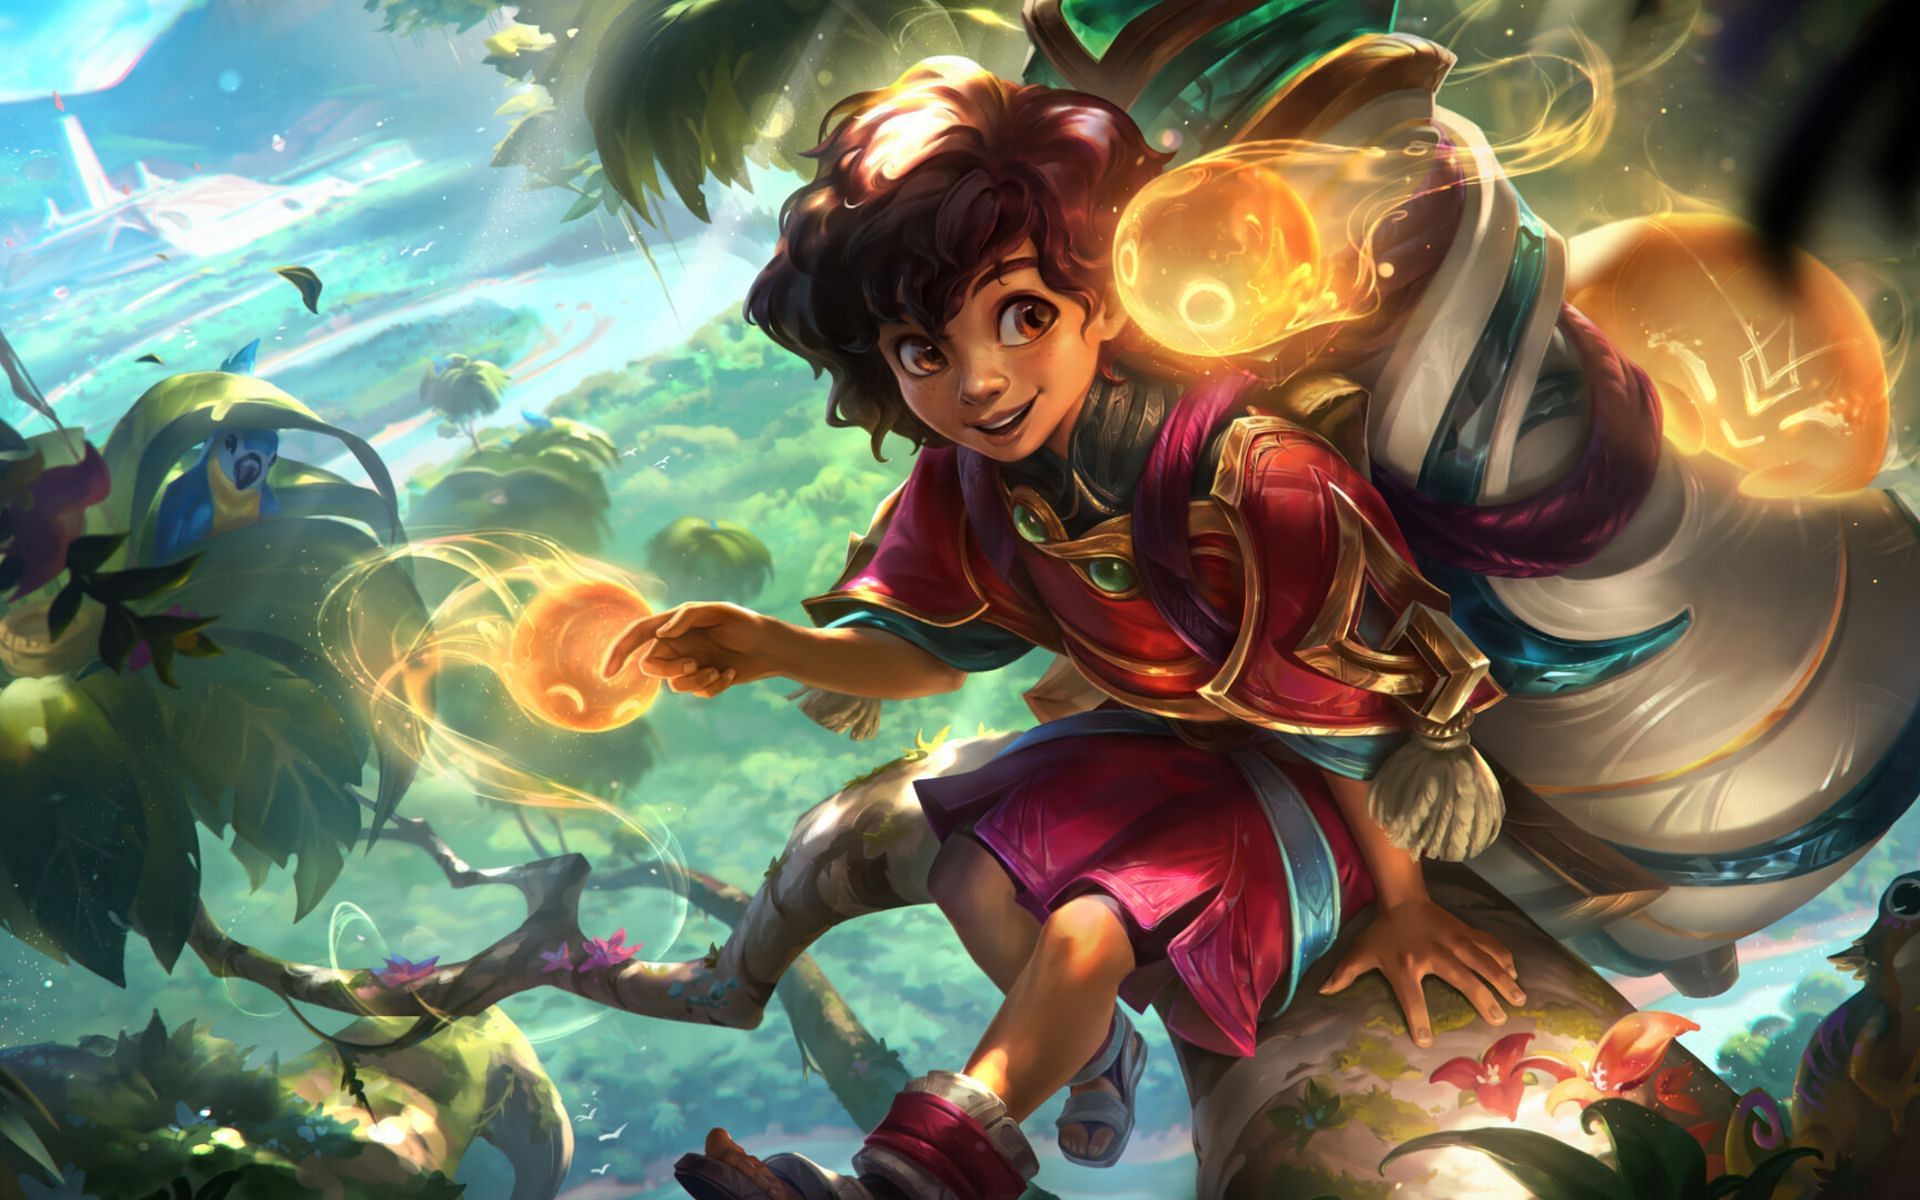 Milio is set to be the latest champions heading to League of Legends (Image via Riot Games)